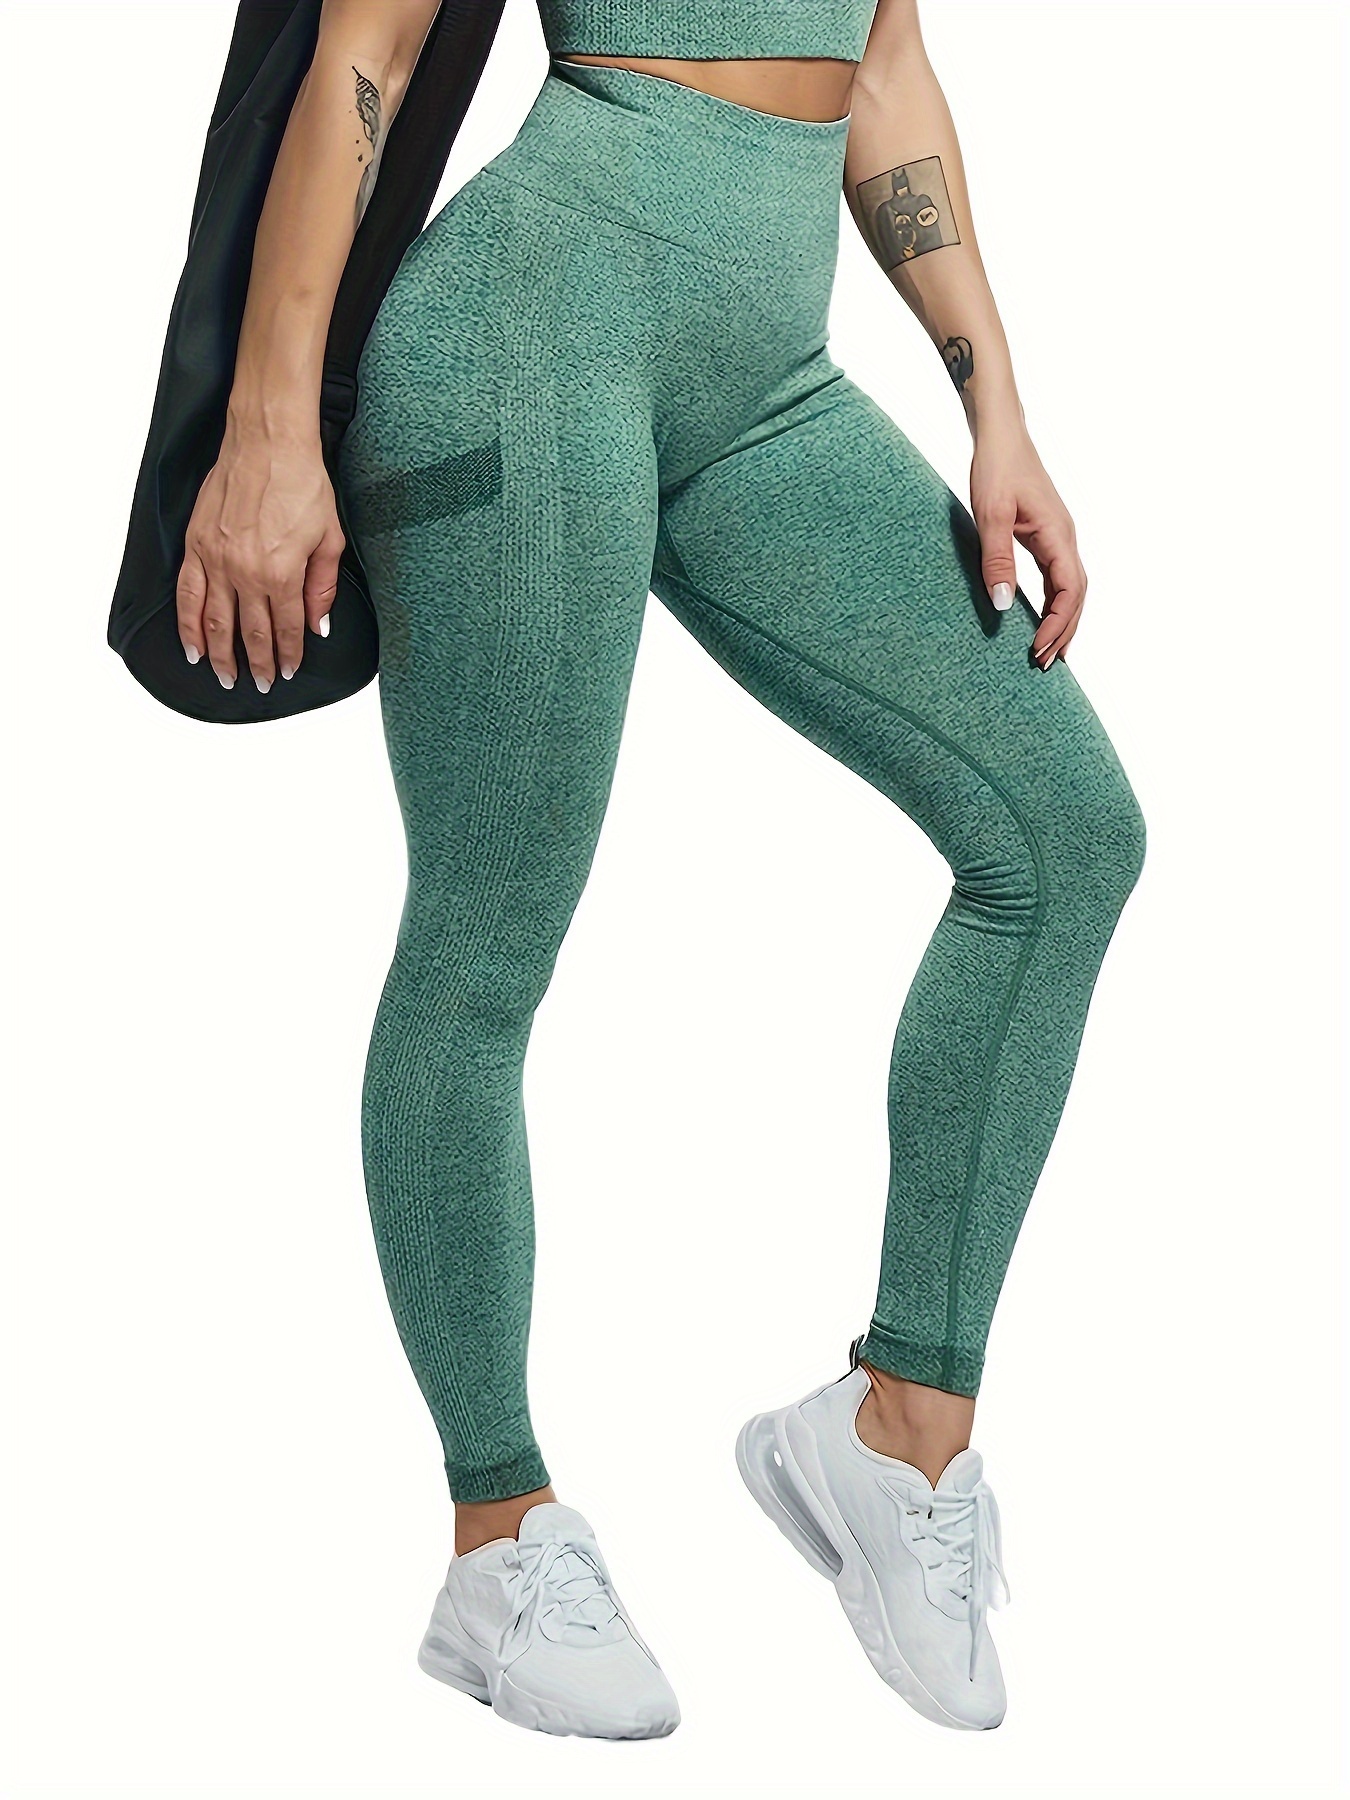 High Waisted Solid Color Yoga Align Leggings For Women Designer Gym Wear  With Elastic Fit 2XL From Apparel876, $11.06